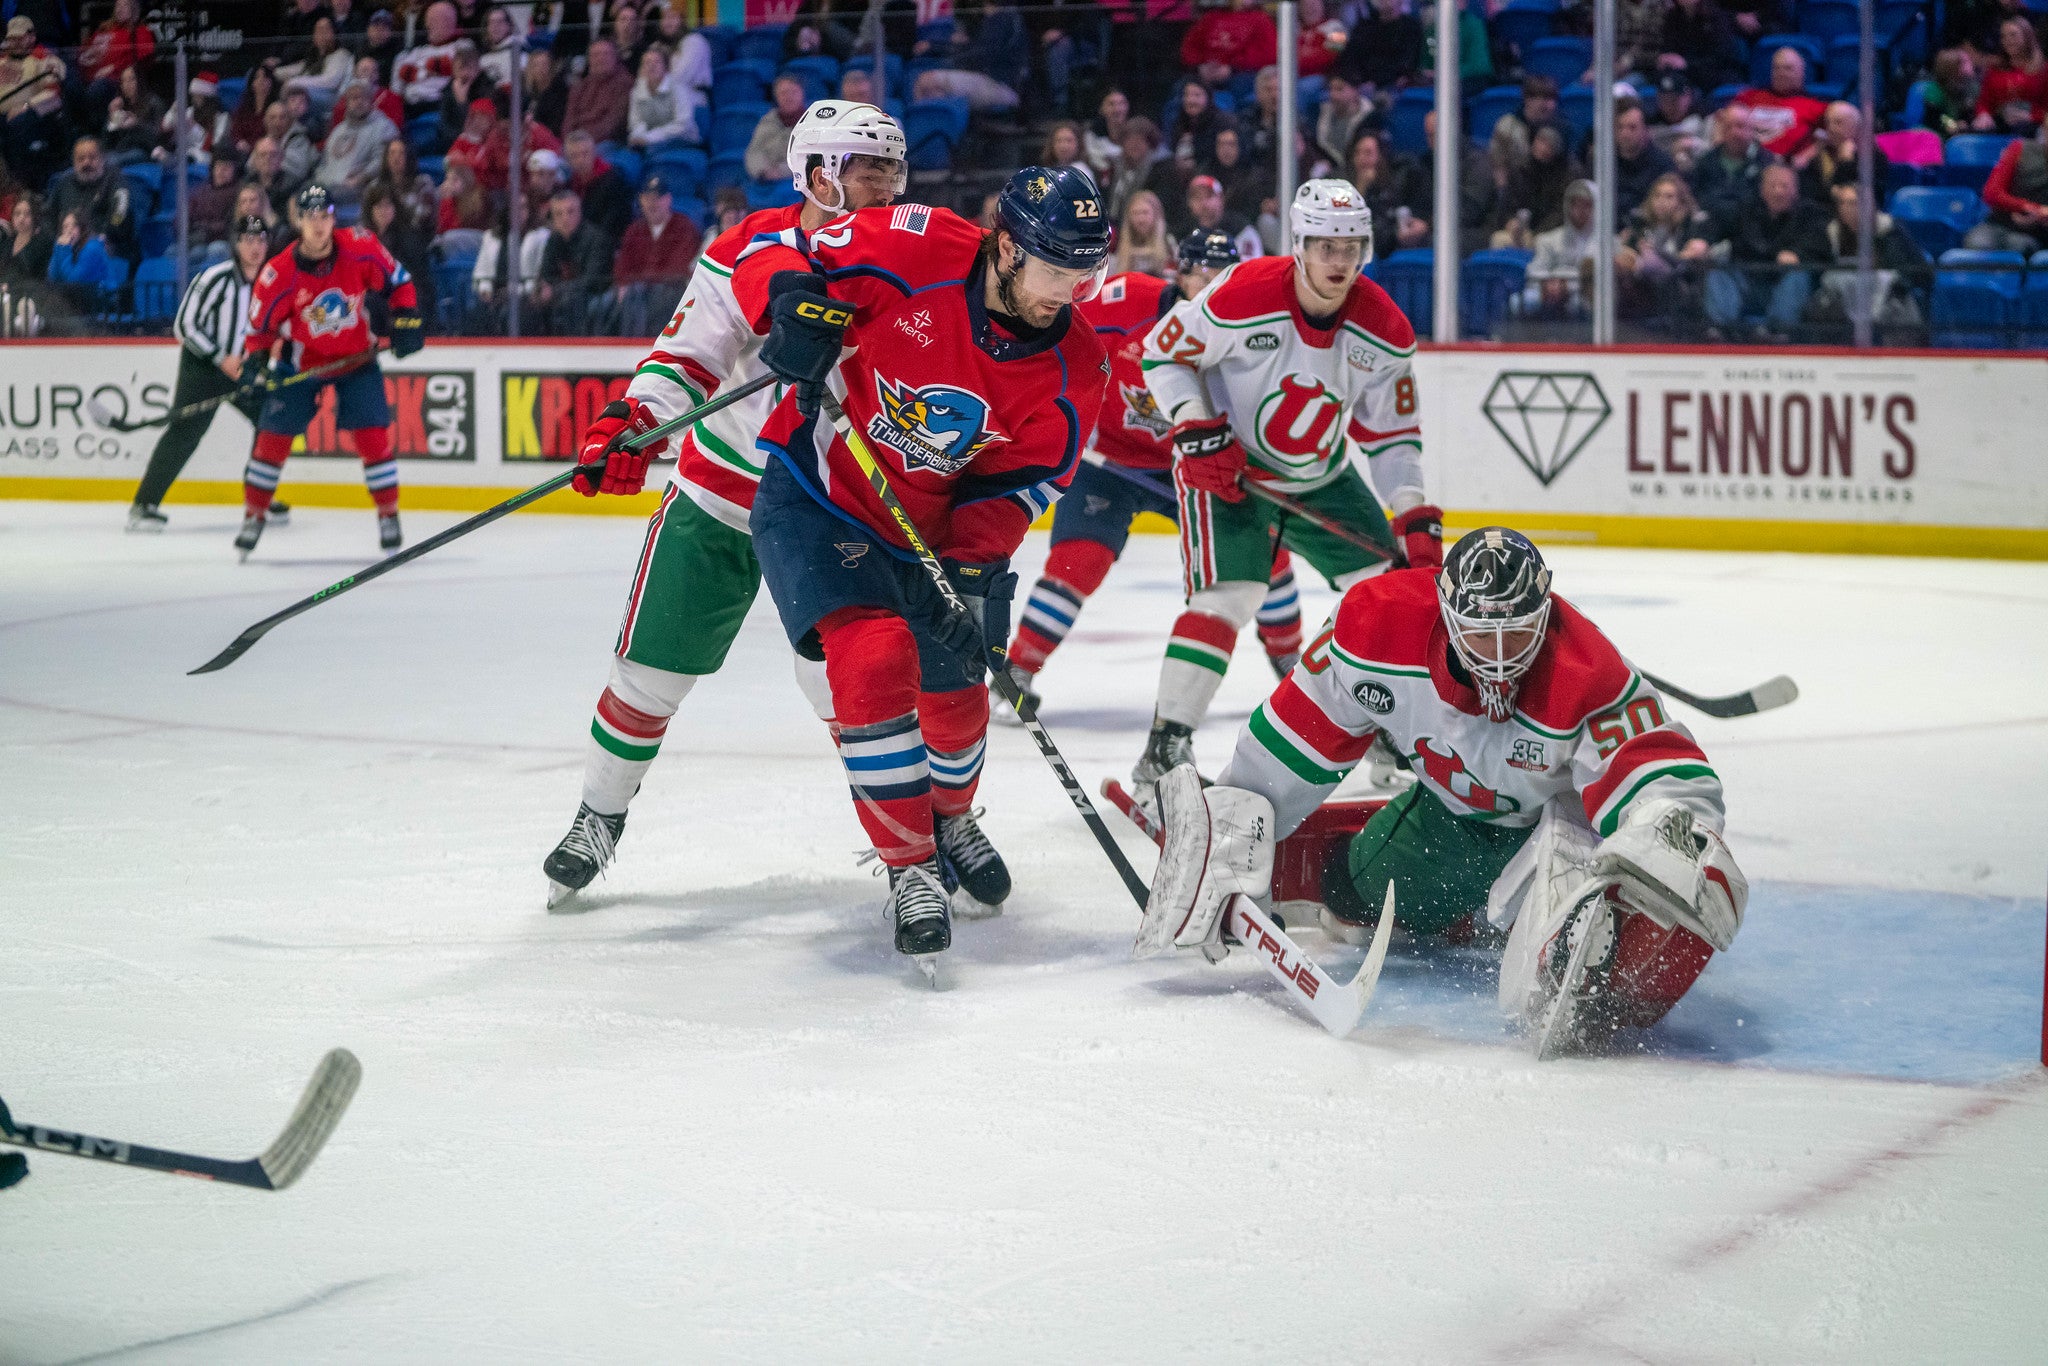 Comets' players benefit from playoff experience